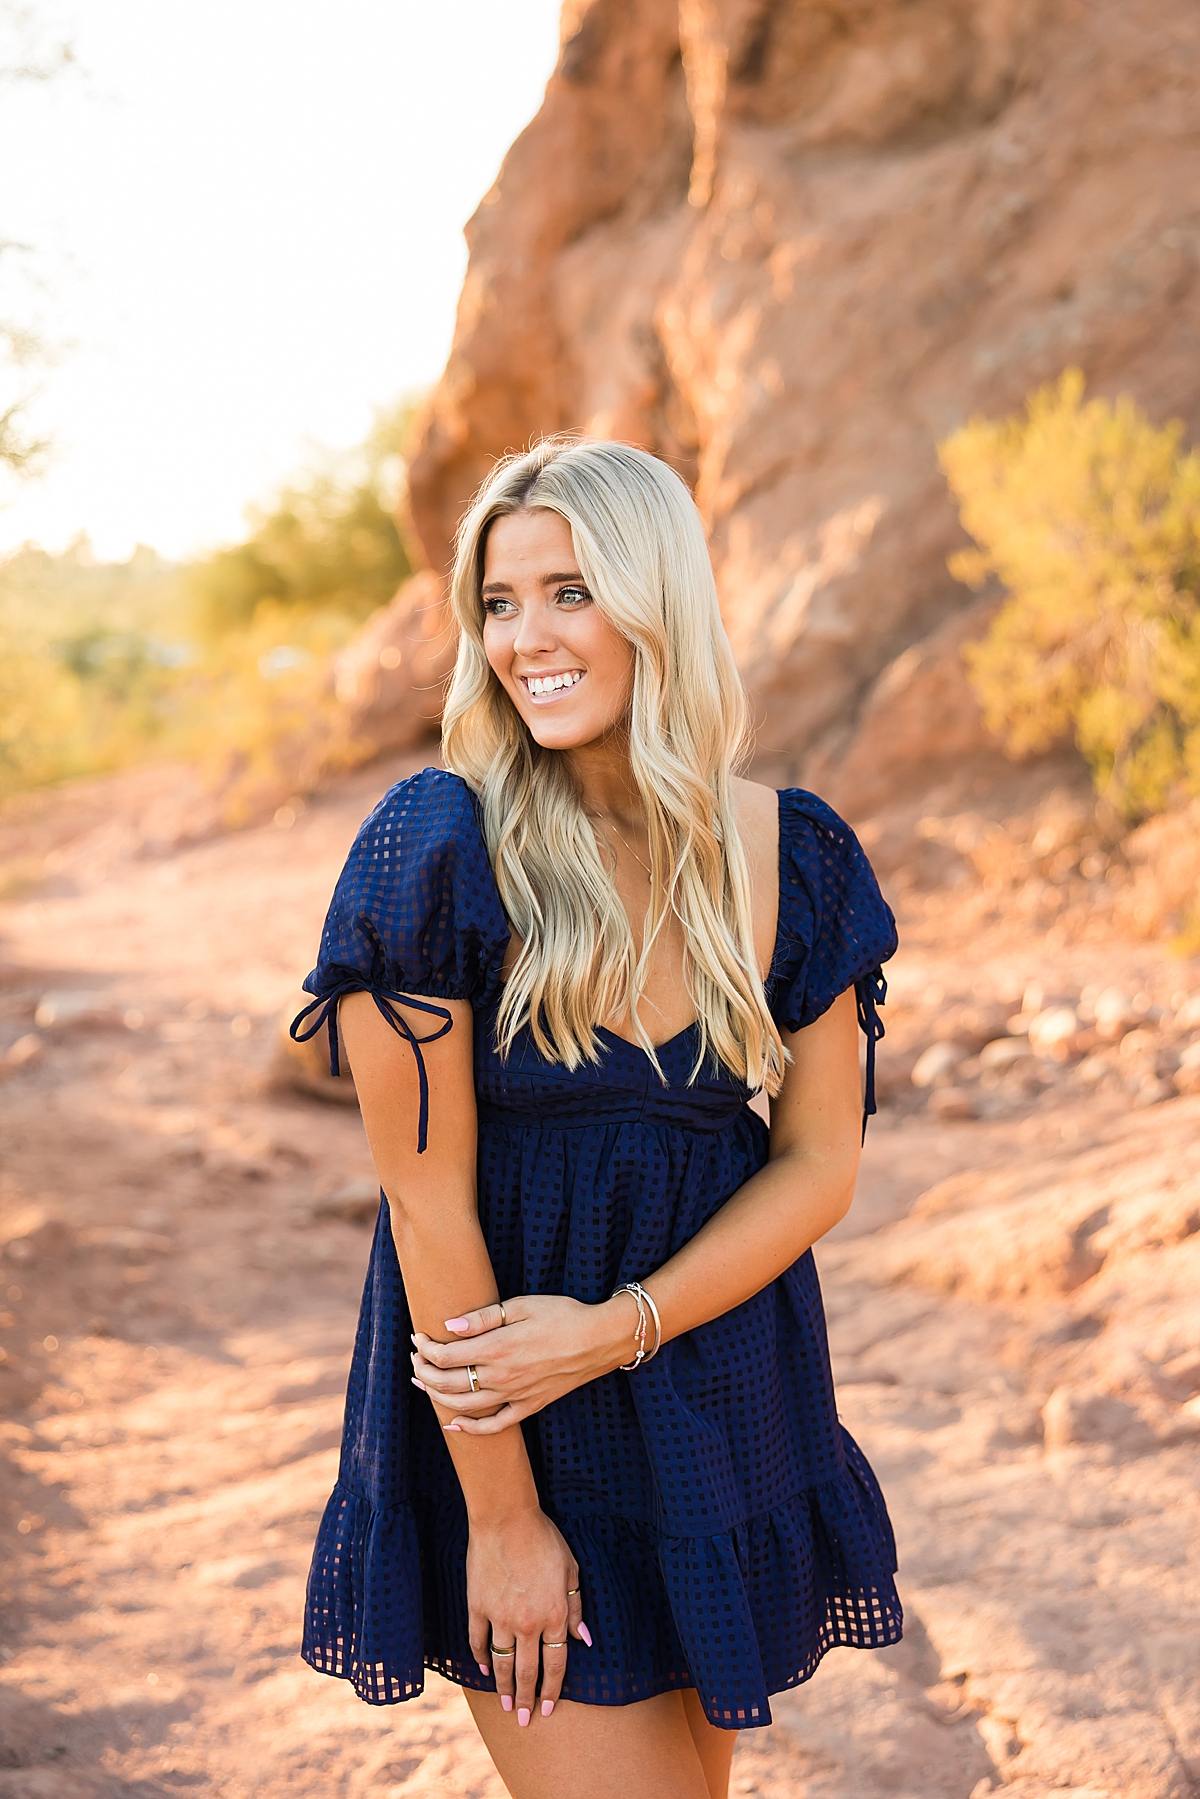 Leah Hope Photography | Scottsdale Arizona Senior Photographer | Phoenix Arizona High School Senior Pictures | Natural Light Photography | What to Wear | Senior Girl Poses and Posing Ideas | Senior Photo Shoot Outfit Inspiration | Outfits and Styling Fashion Ideas | Cactus Desert Scenery | Golden Hour Sunset Light | Papago Park Red Rock | Urban Casual Senior Photos